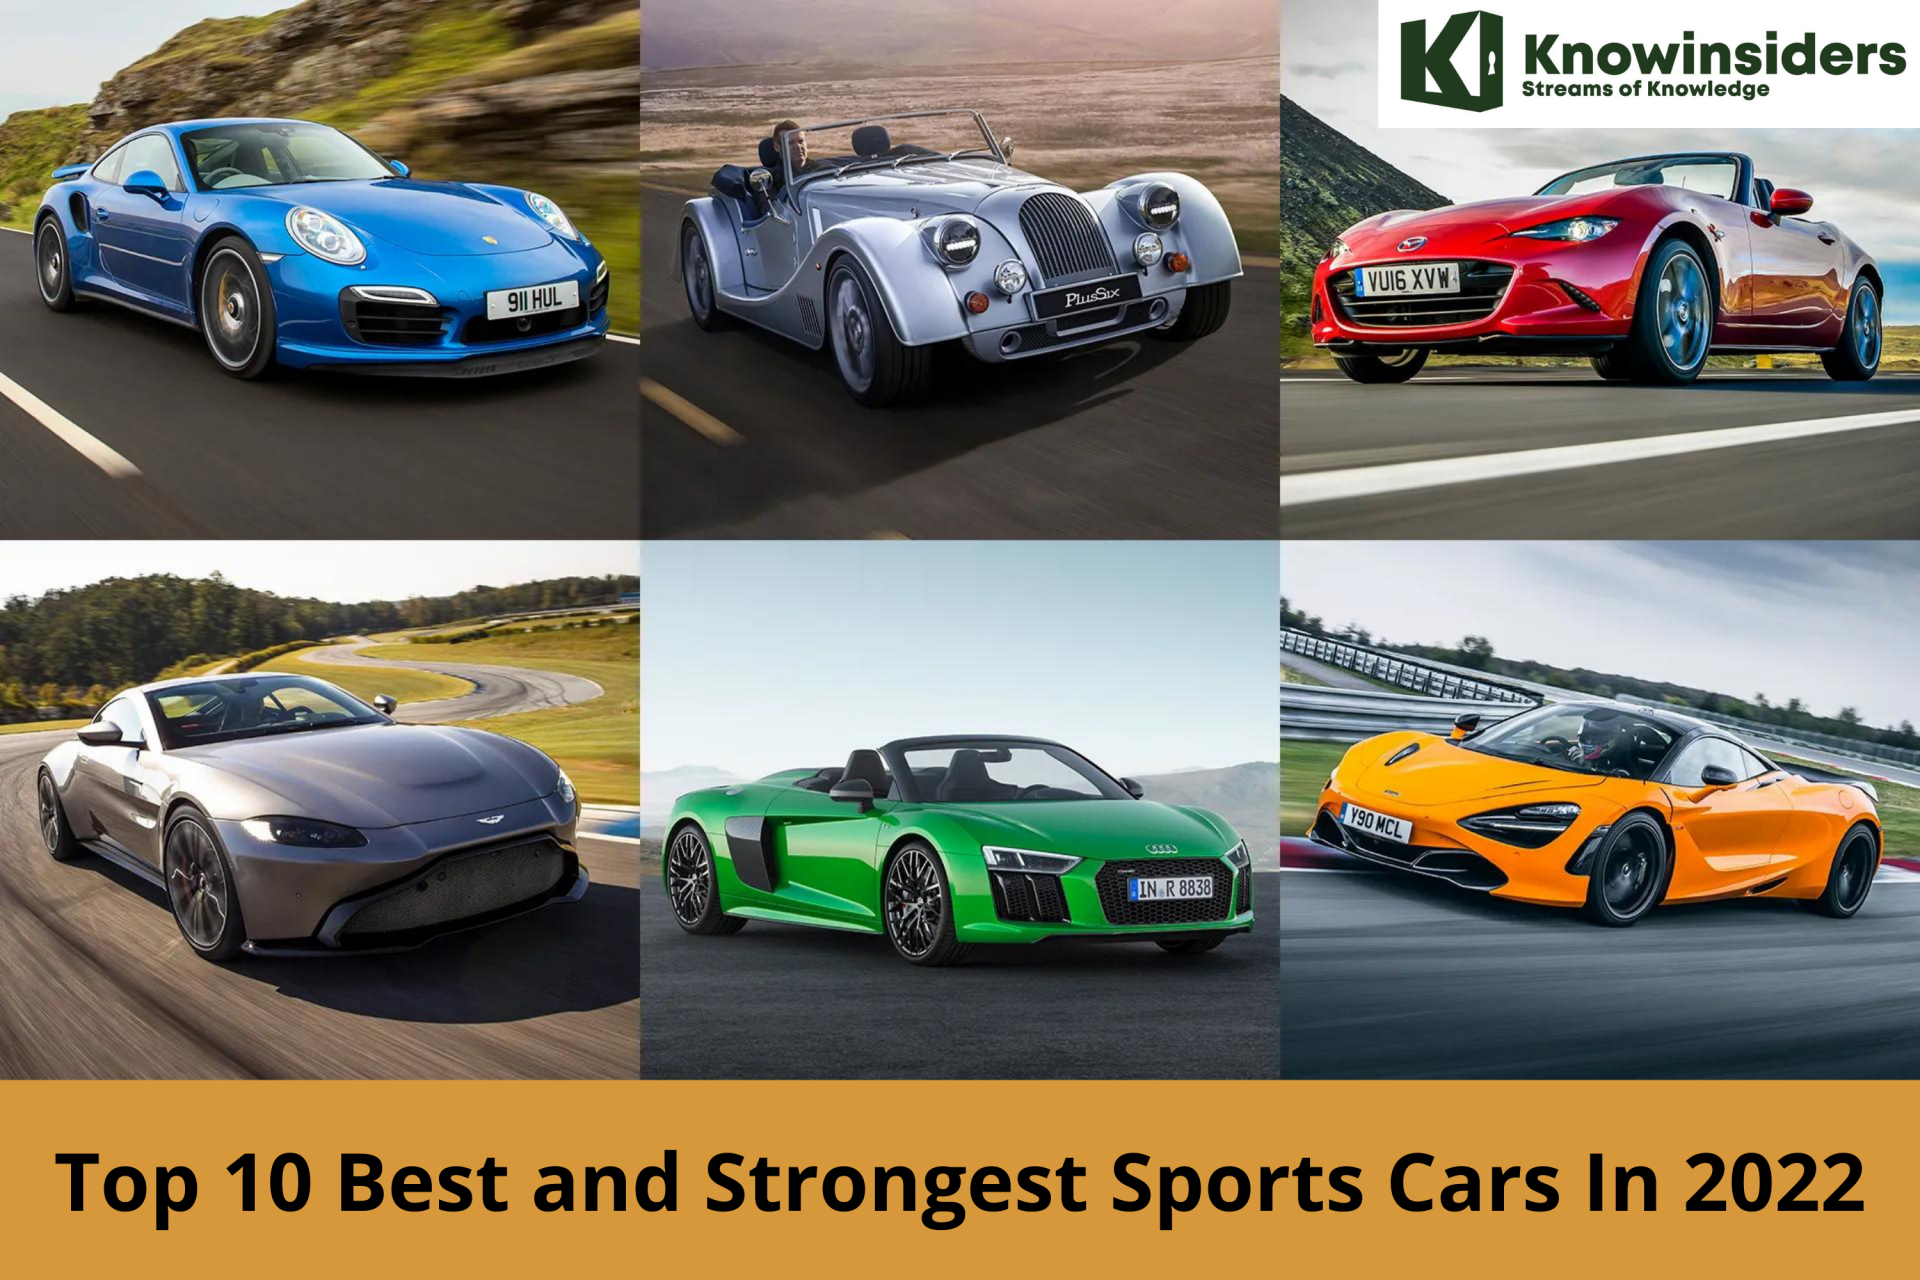 Top 10 Best and Strongest Sports Cars In 2022